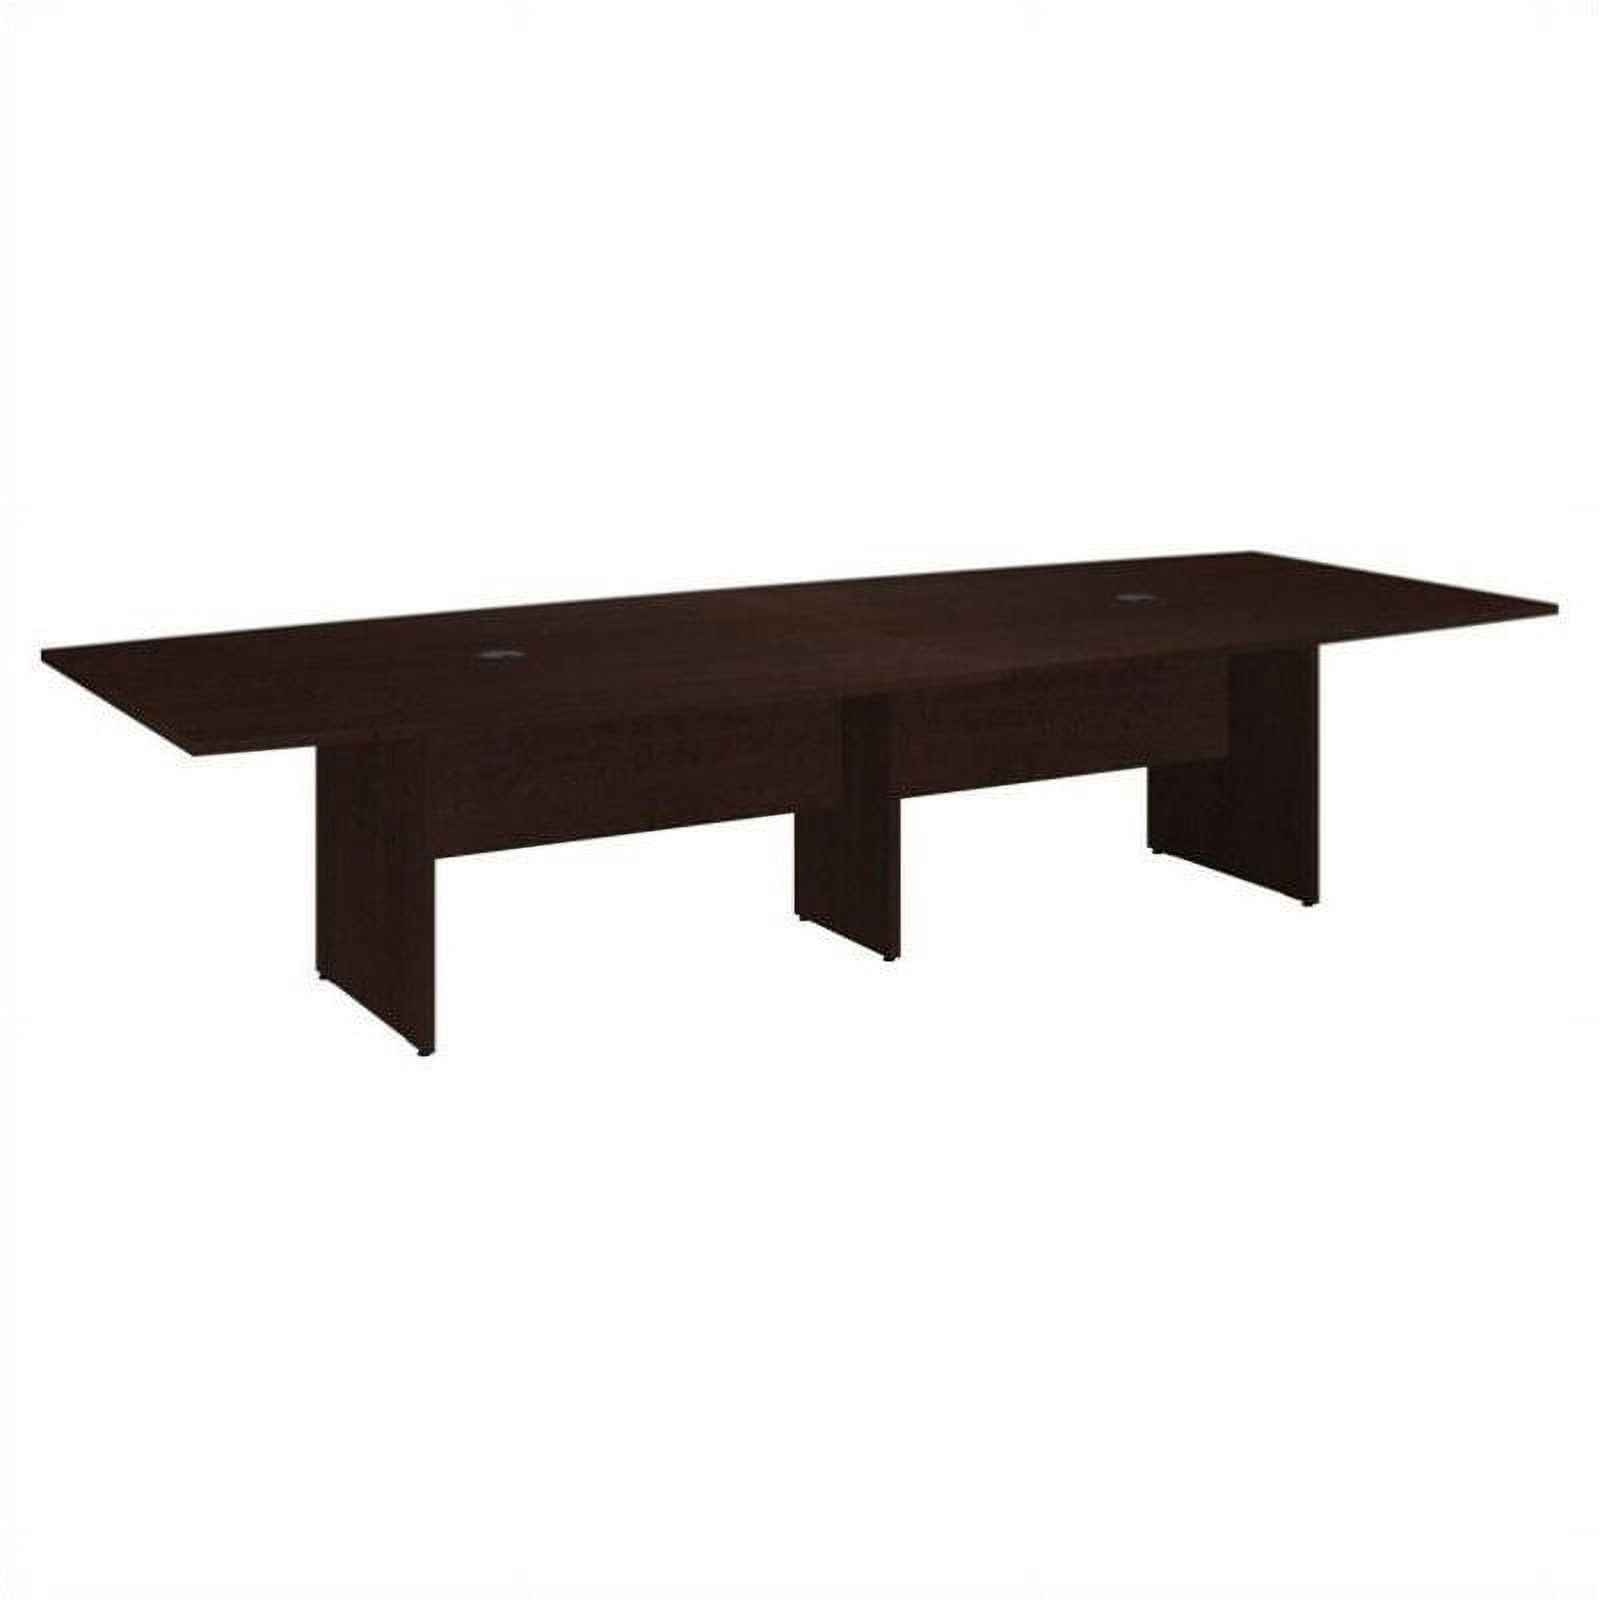 Picture of Bush Business Furniture 99TB12048MRK 120 x 48 in. Boat Shaped Conference Table with Wood Base - Mocha Cherry